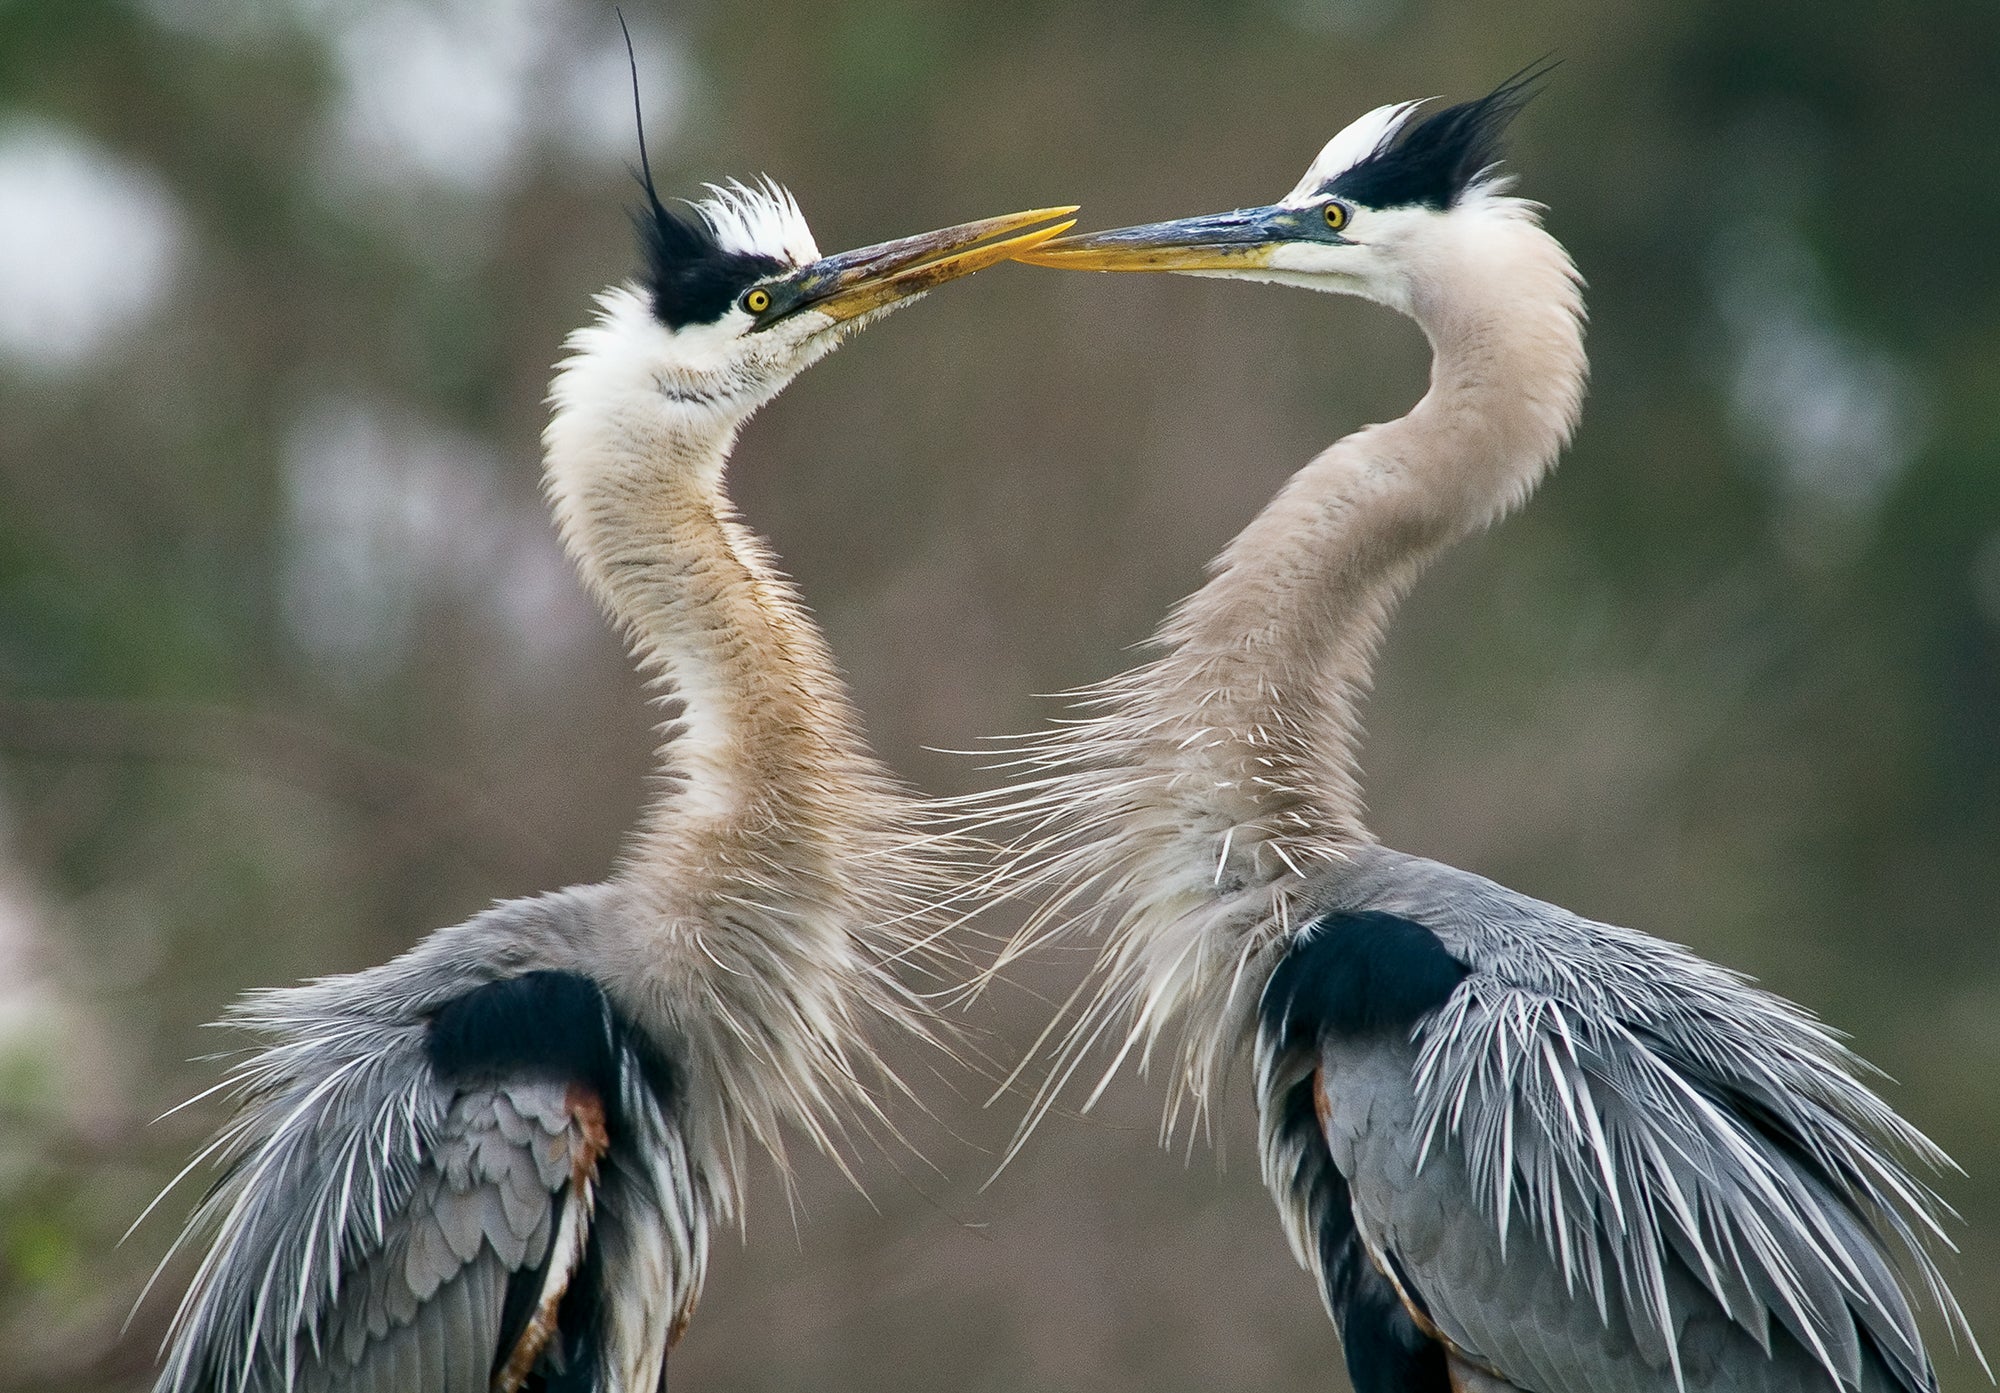 Two great blue herons in profile, touching bills. End of image description.